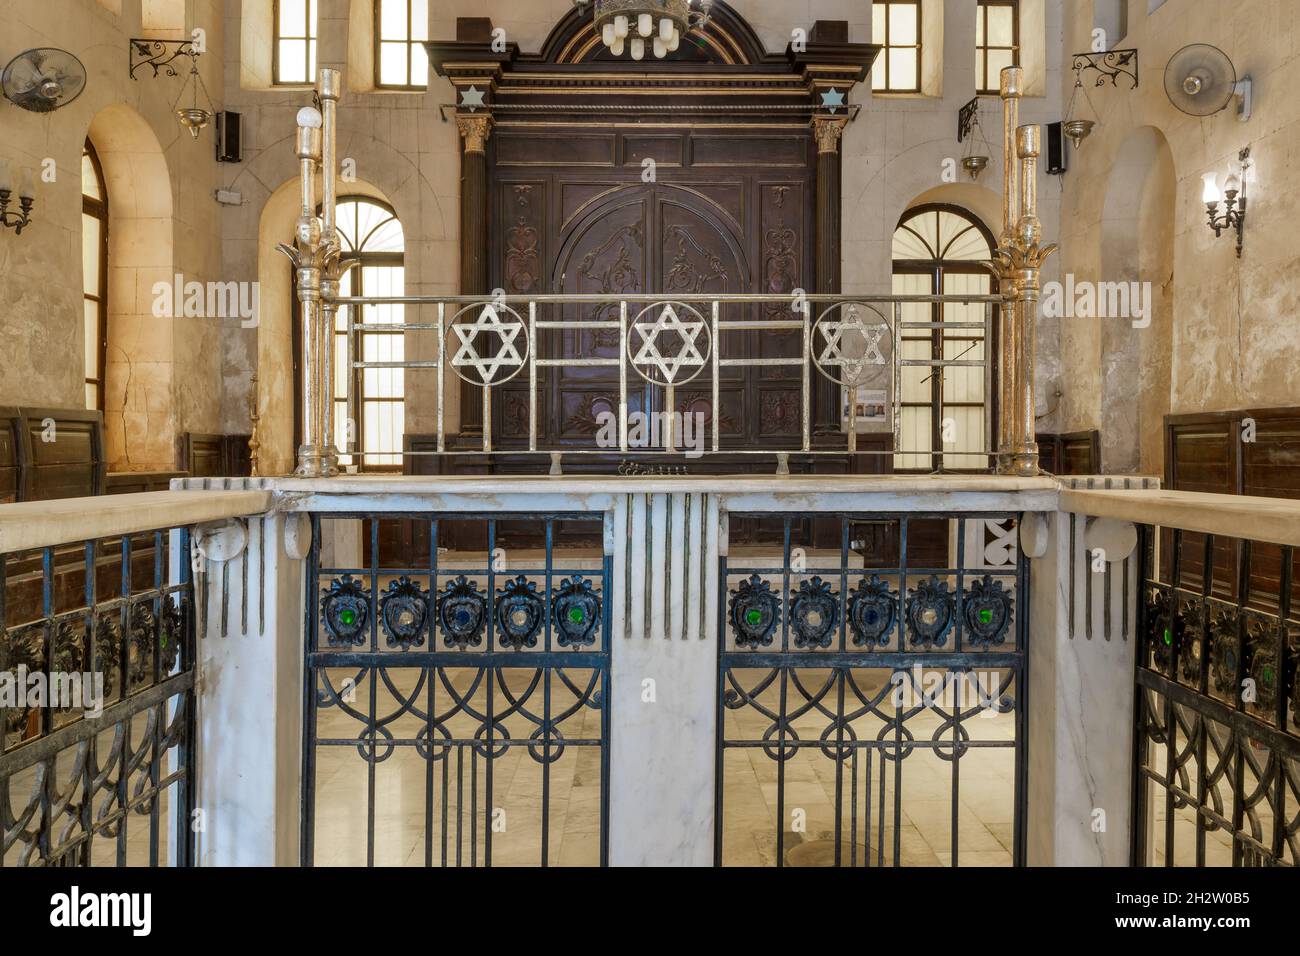 Altar of historic Jewish Maimonides Synagogue or Rav Moshe Synagogue with wooden entrance at the far end, Gamalia district, Cairo, Egypt Stock Photo